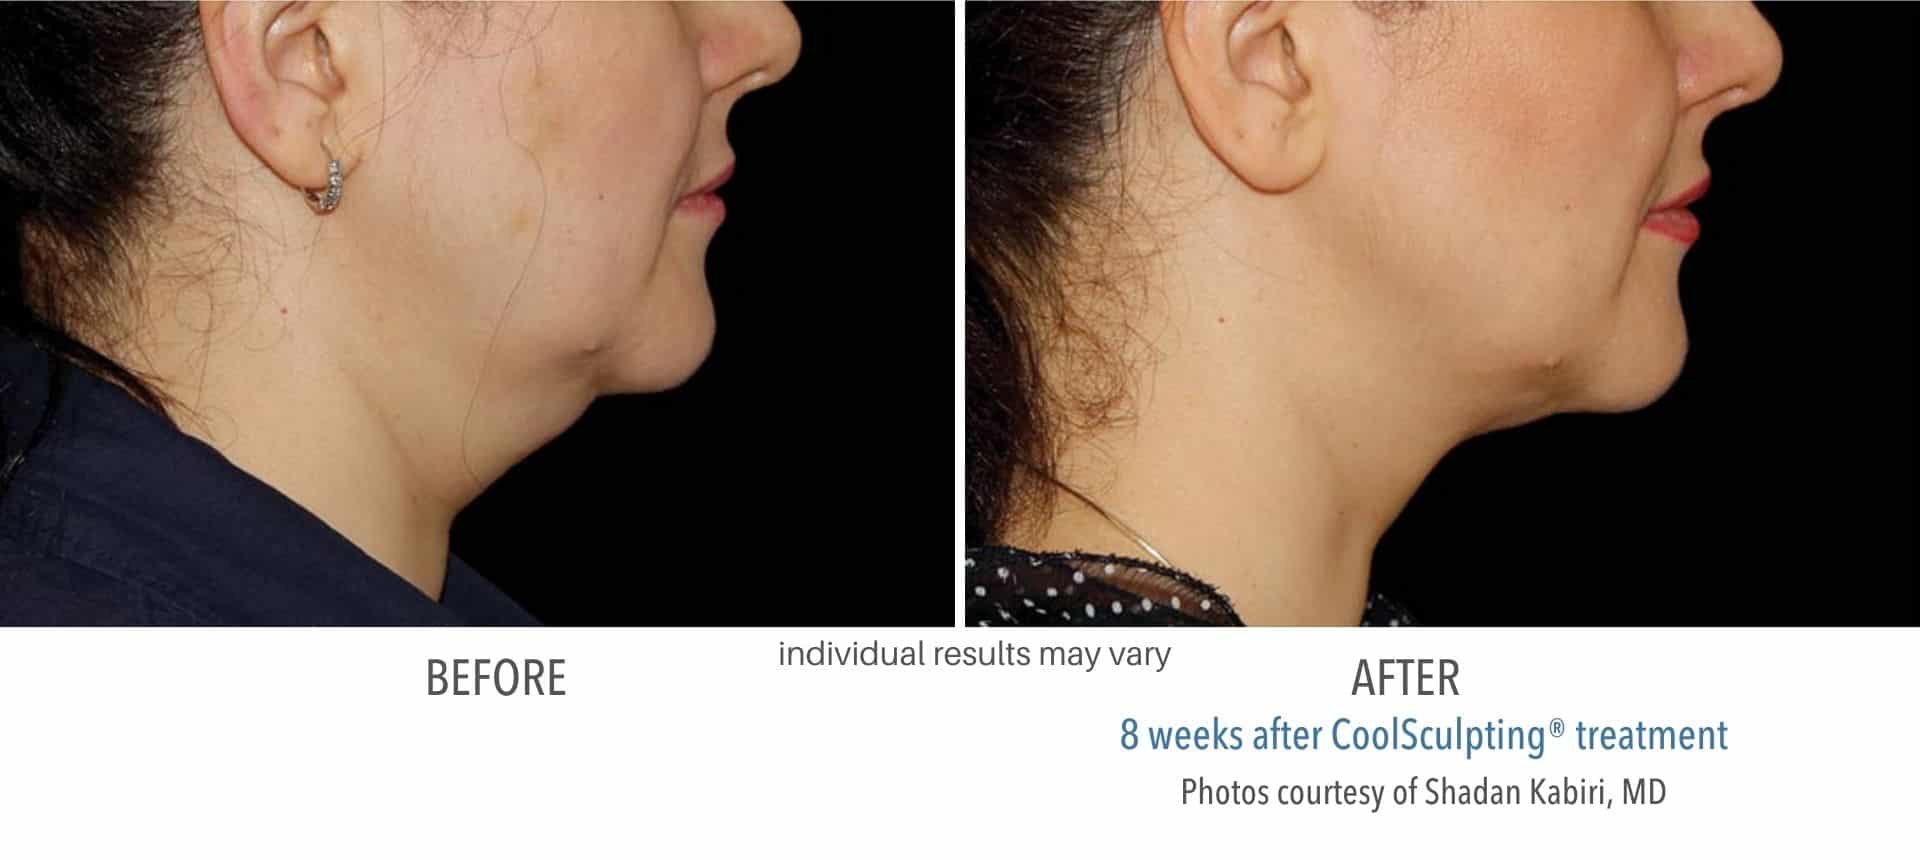 CoolSculpting Chin vs. Chin Lipo: The Pros and Cons